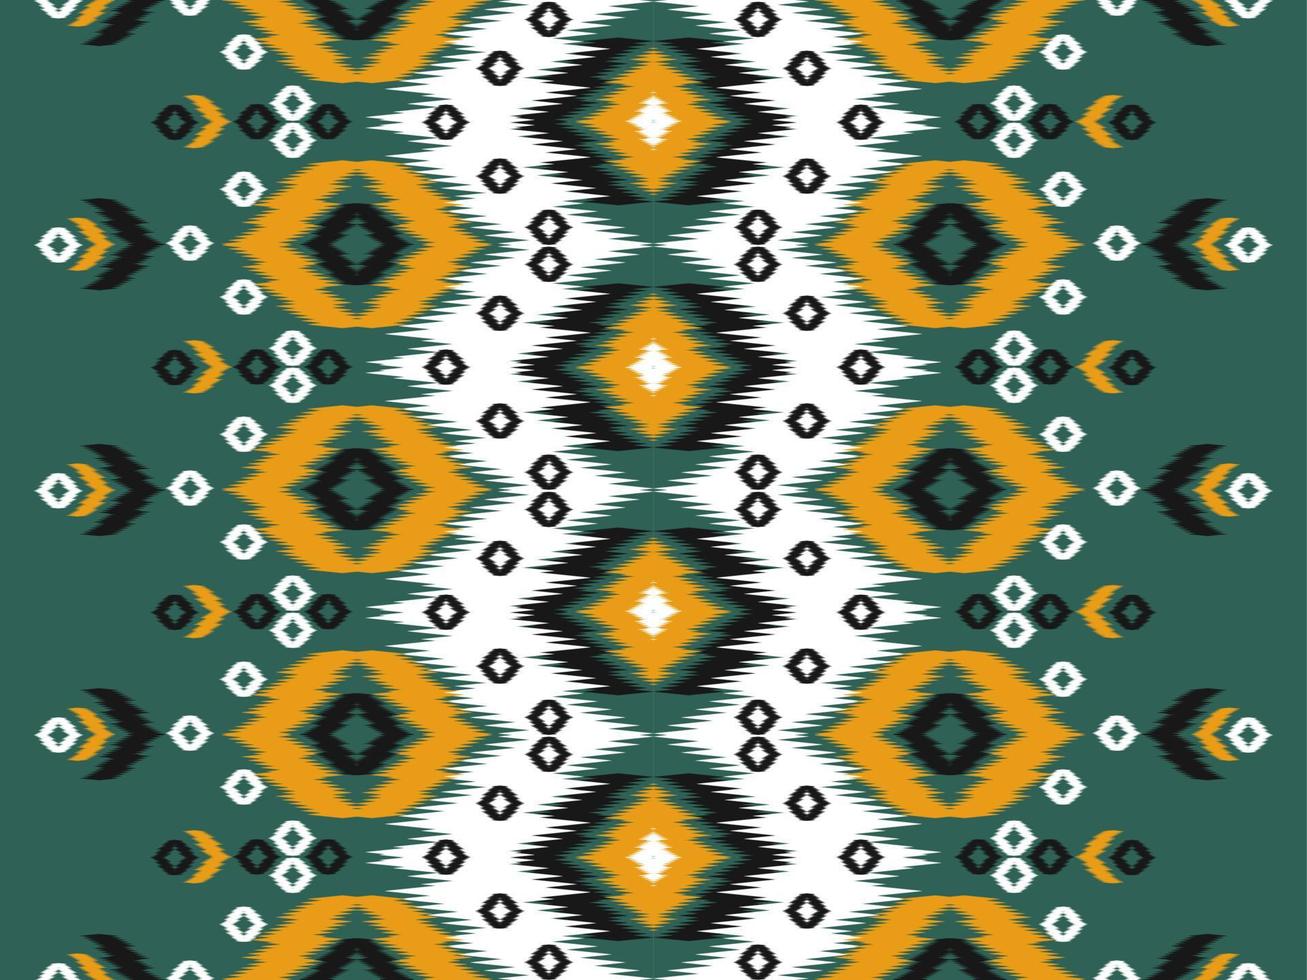 Ethnic oriental ikat seamless pattern traditional. Fabric Indian style. Design for background, wallpaper, vector illustration, fabric, clothing, carpet, textile, batik, embroidery.